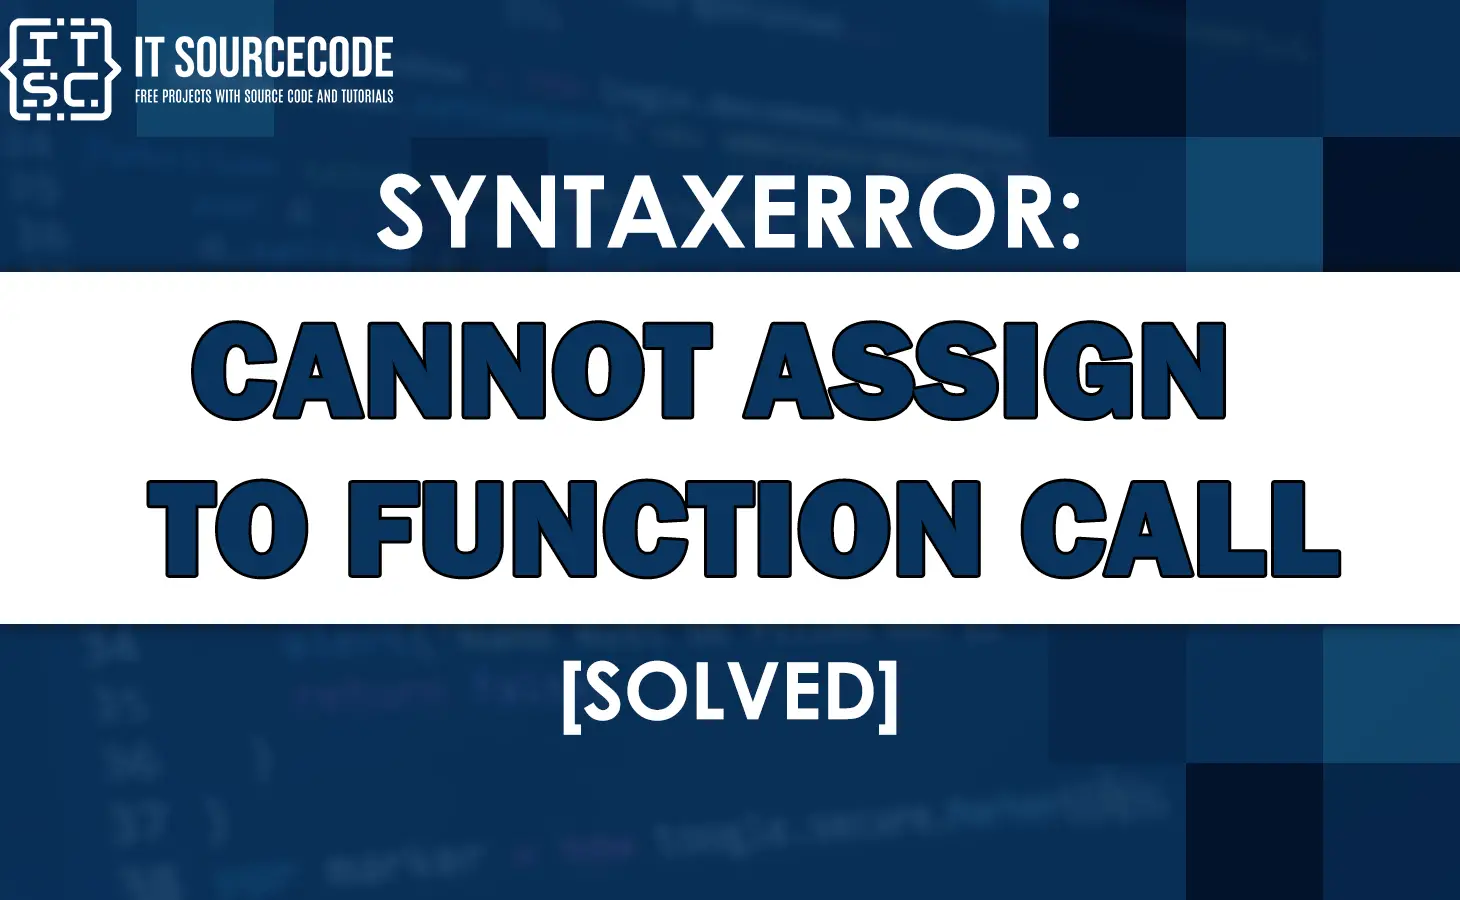 Syntaxerror: cannot assign to function call